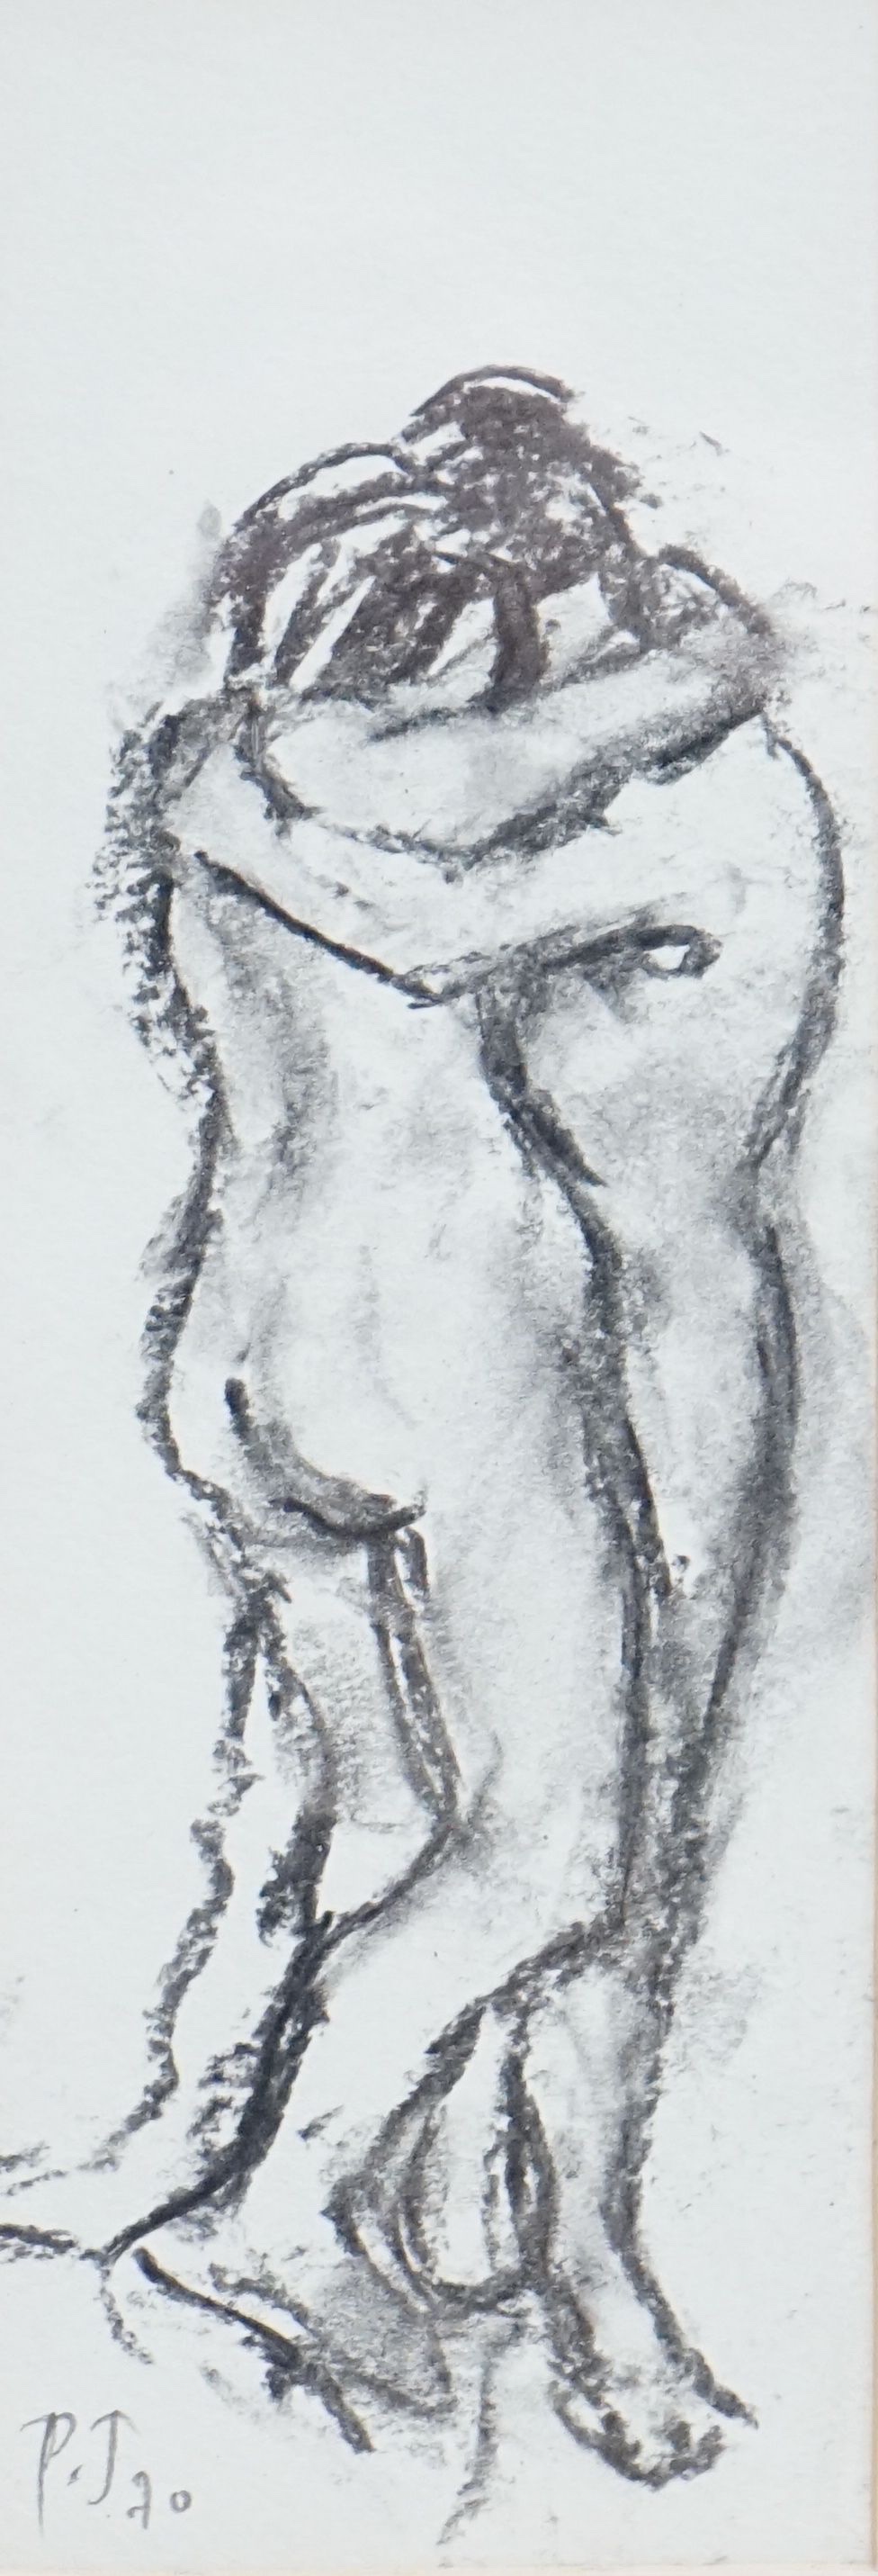 Llewellyn Petley Jones (1908-1986), charcoal drawing, Embracing Lovers, initialled and dated '70, 25 x 8.5cm